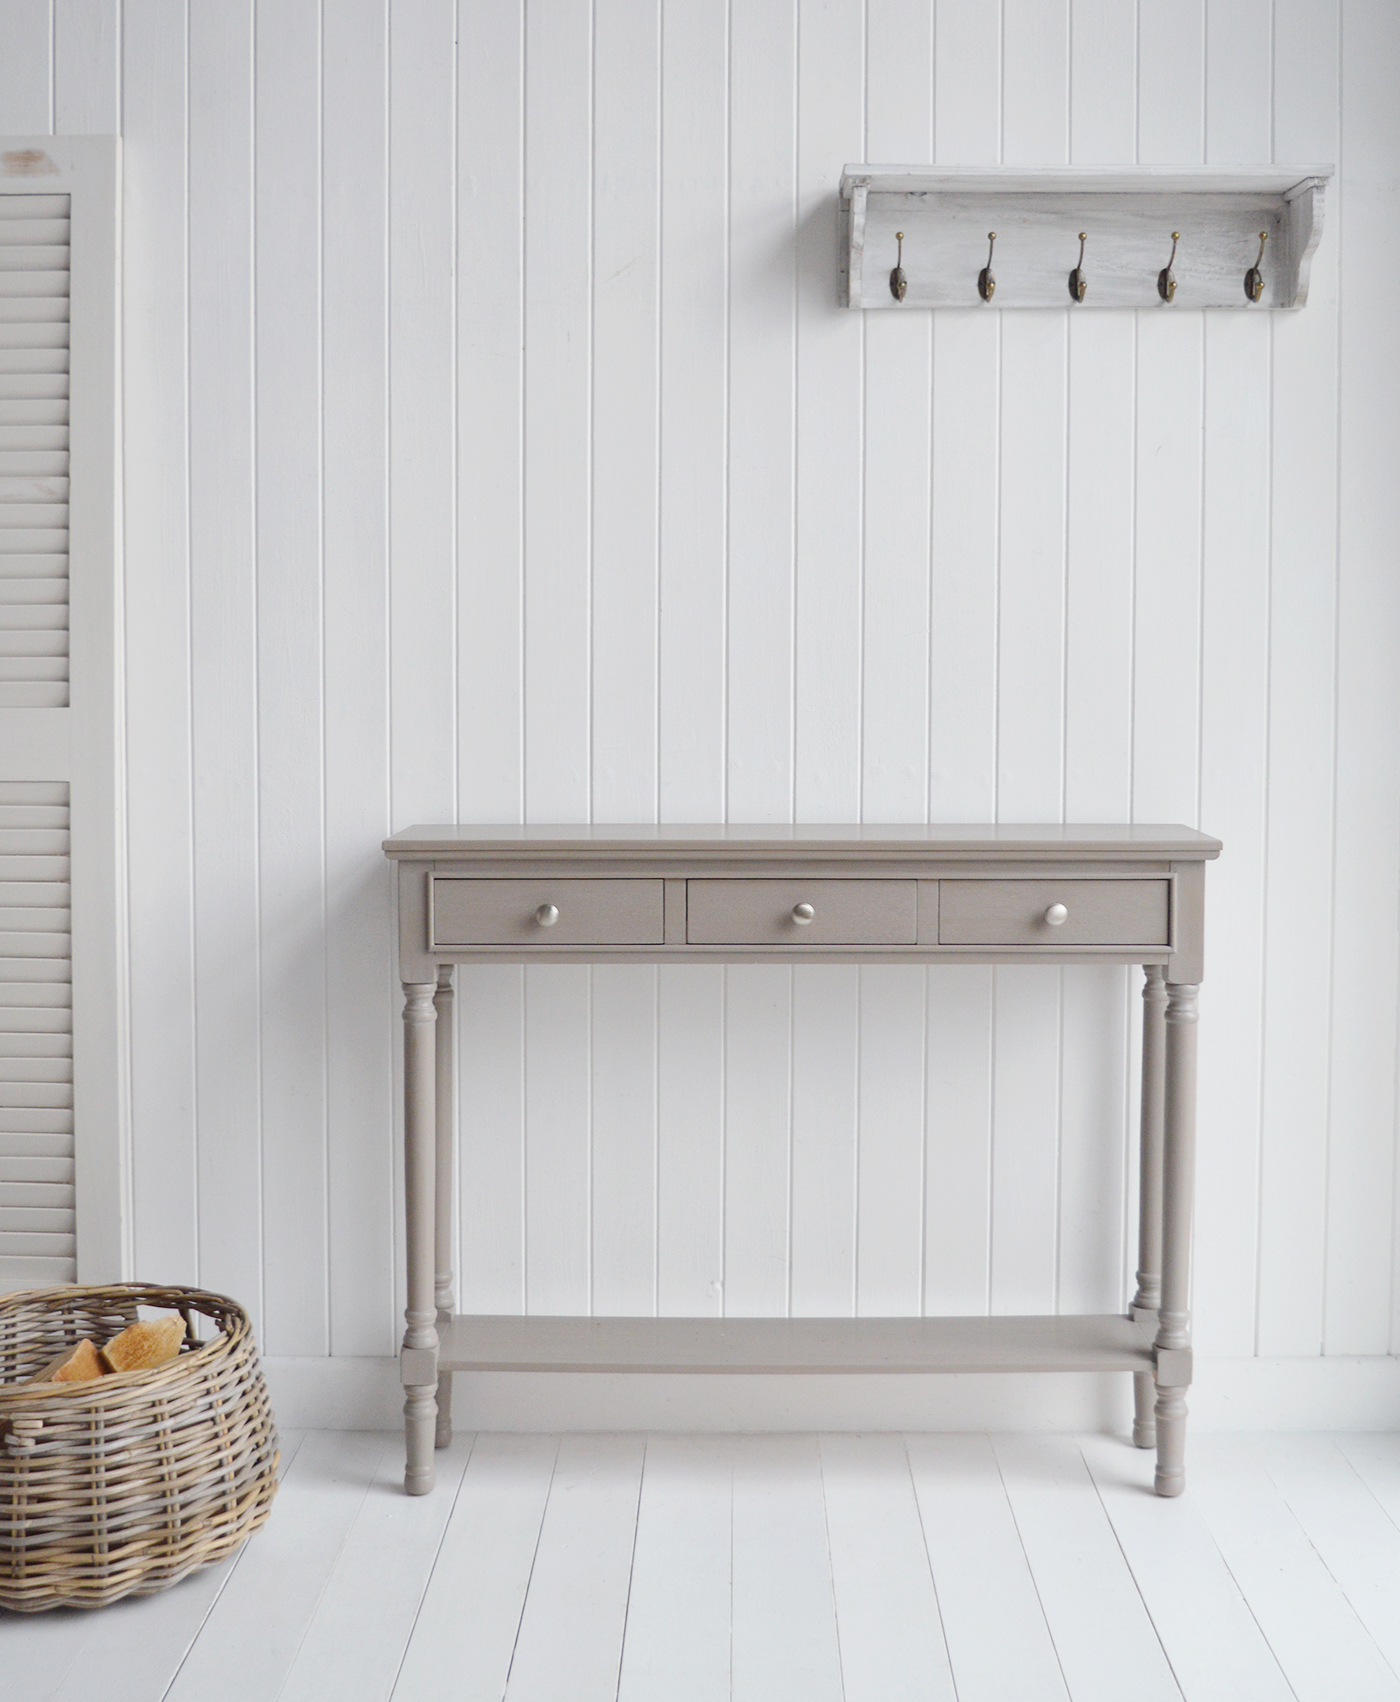 Bristol narrow 24cm vintage grey hallway console table - New England modern country, farmhouse and coastal furniture and interiors